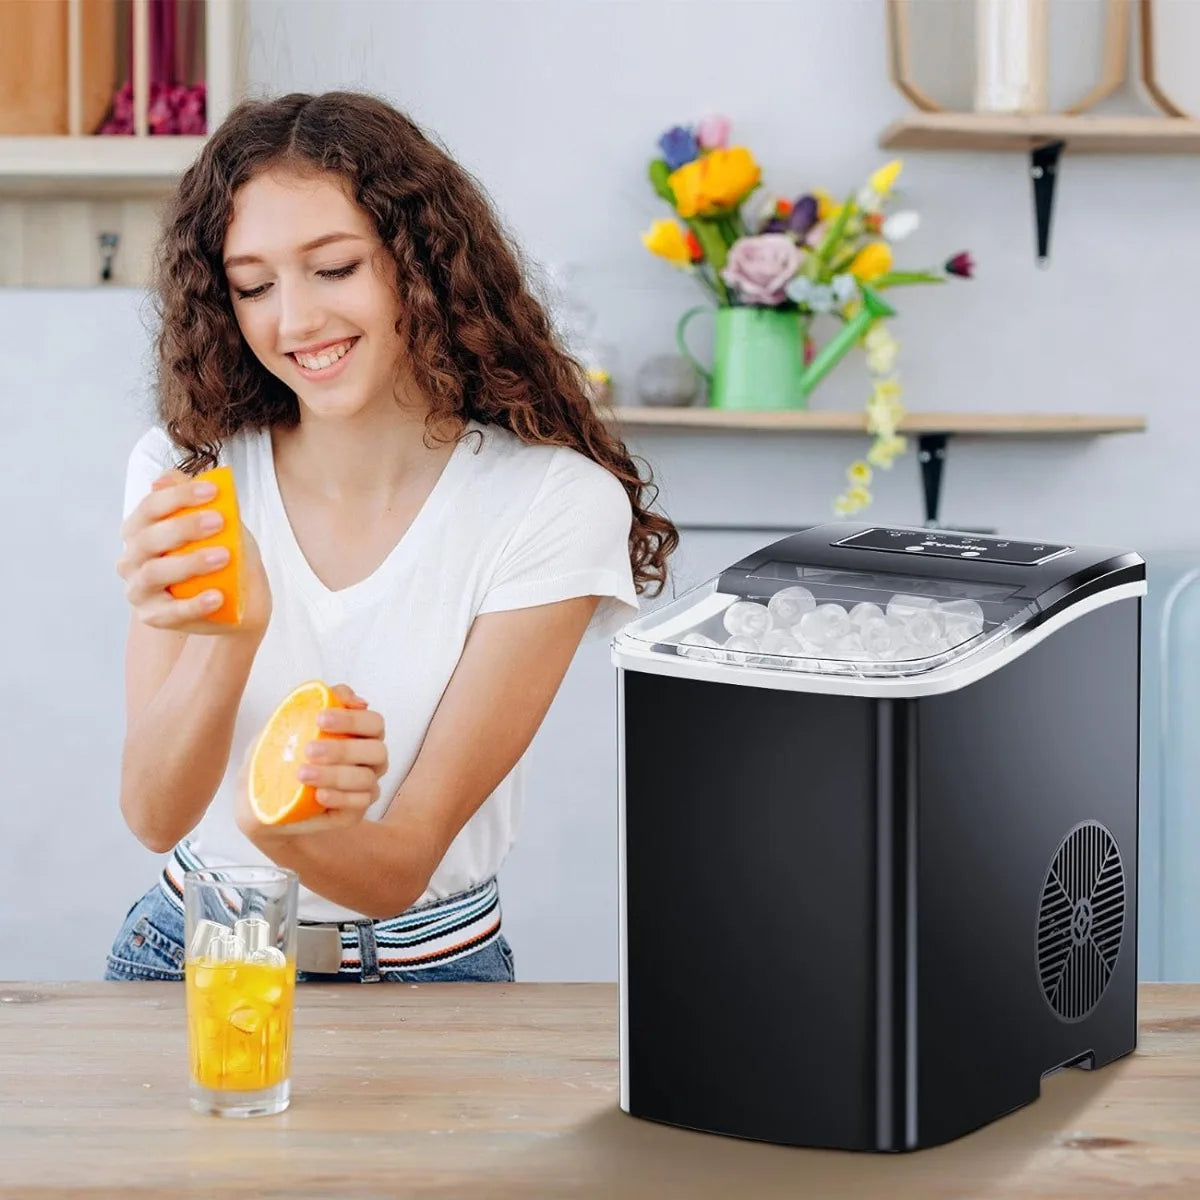 Portable Countertop Ice Maker Machine -  Self-Cleaning Countertop Ice Makers, 9 Cubes in 8-10 mins, 26 lbs/24 Hours | USA | NEW